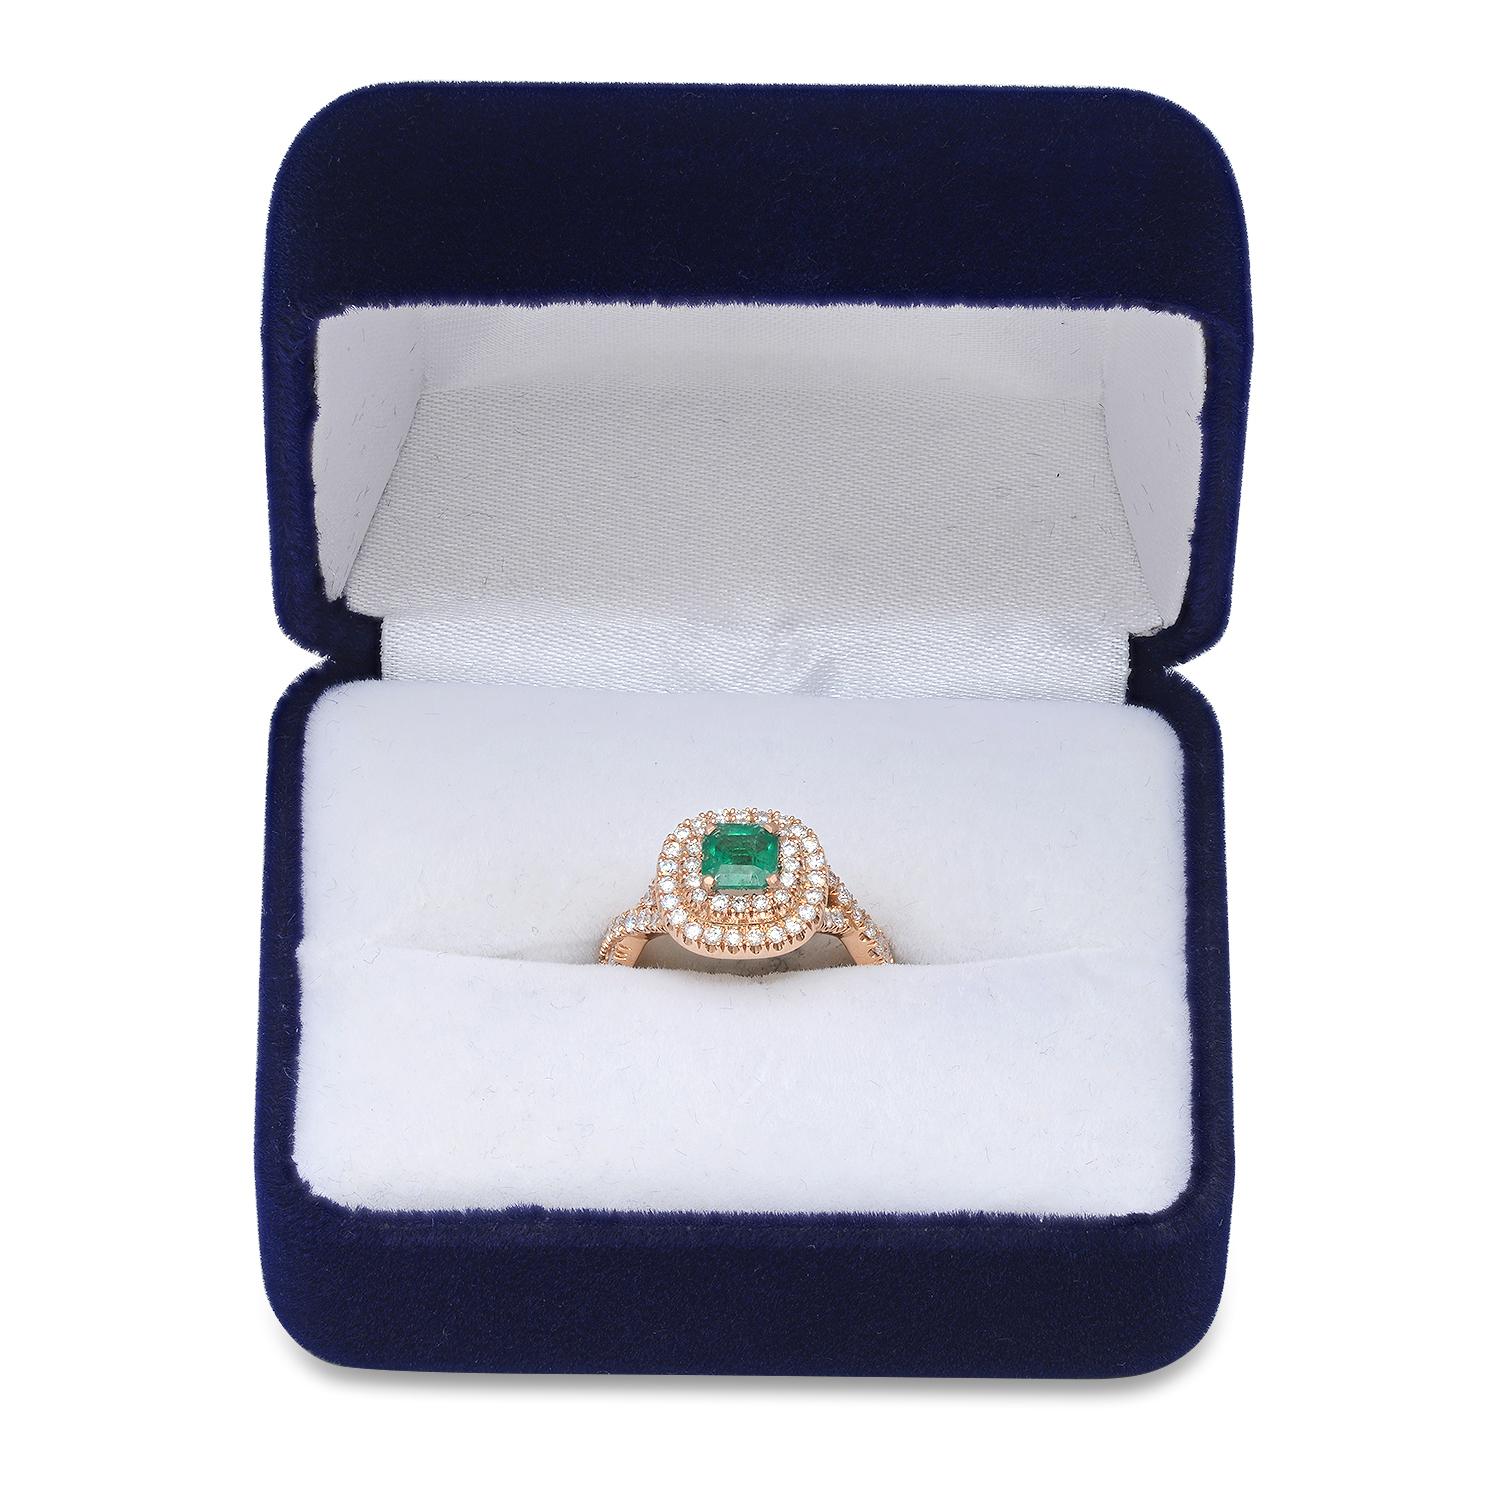 18K Rose Gold Setting with 0.53ct Emerald and 1.1ct Diamond Ring